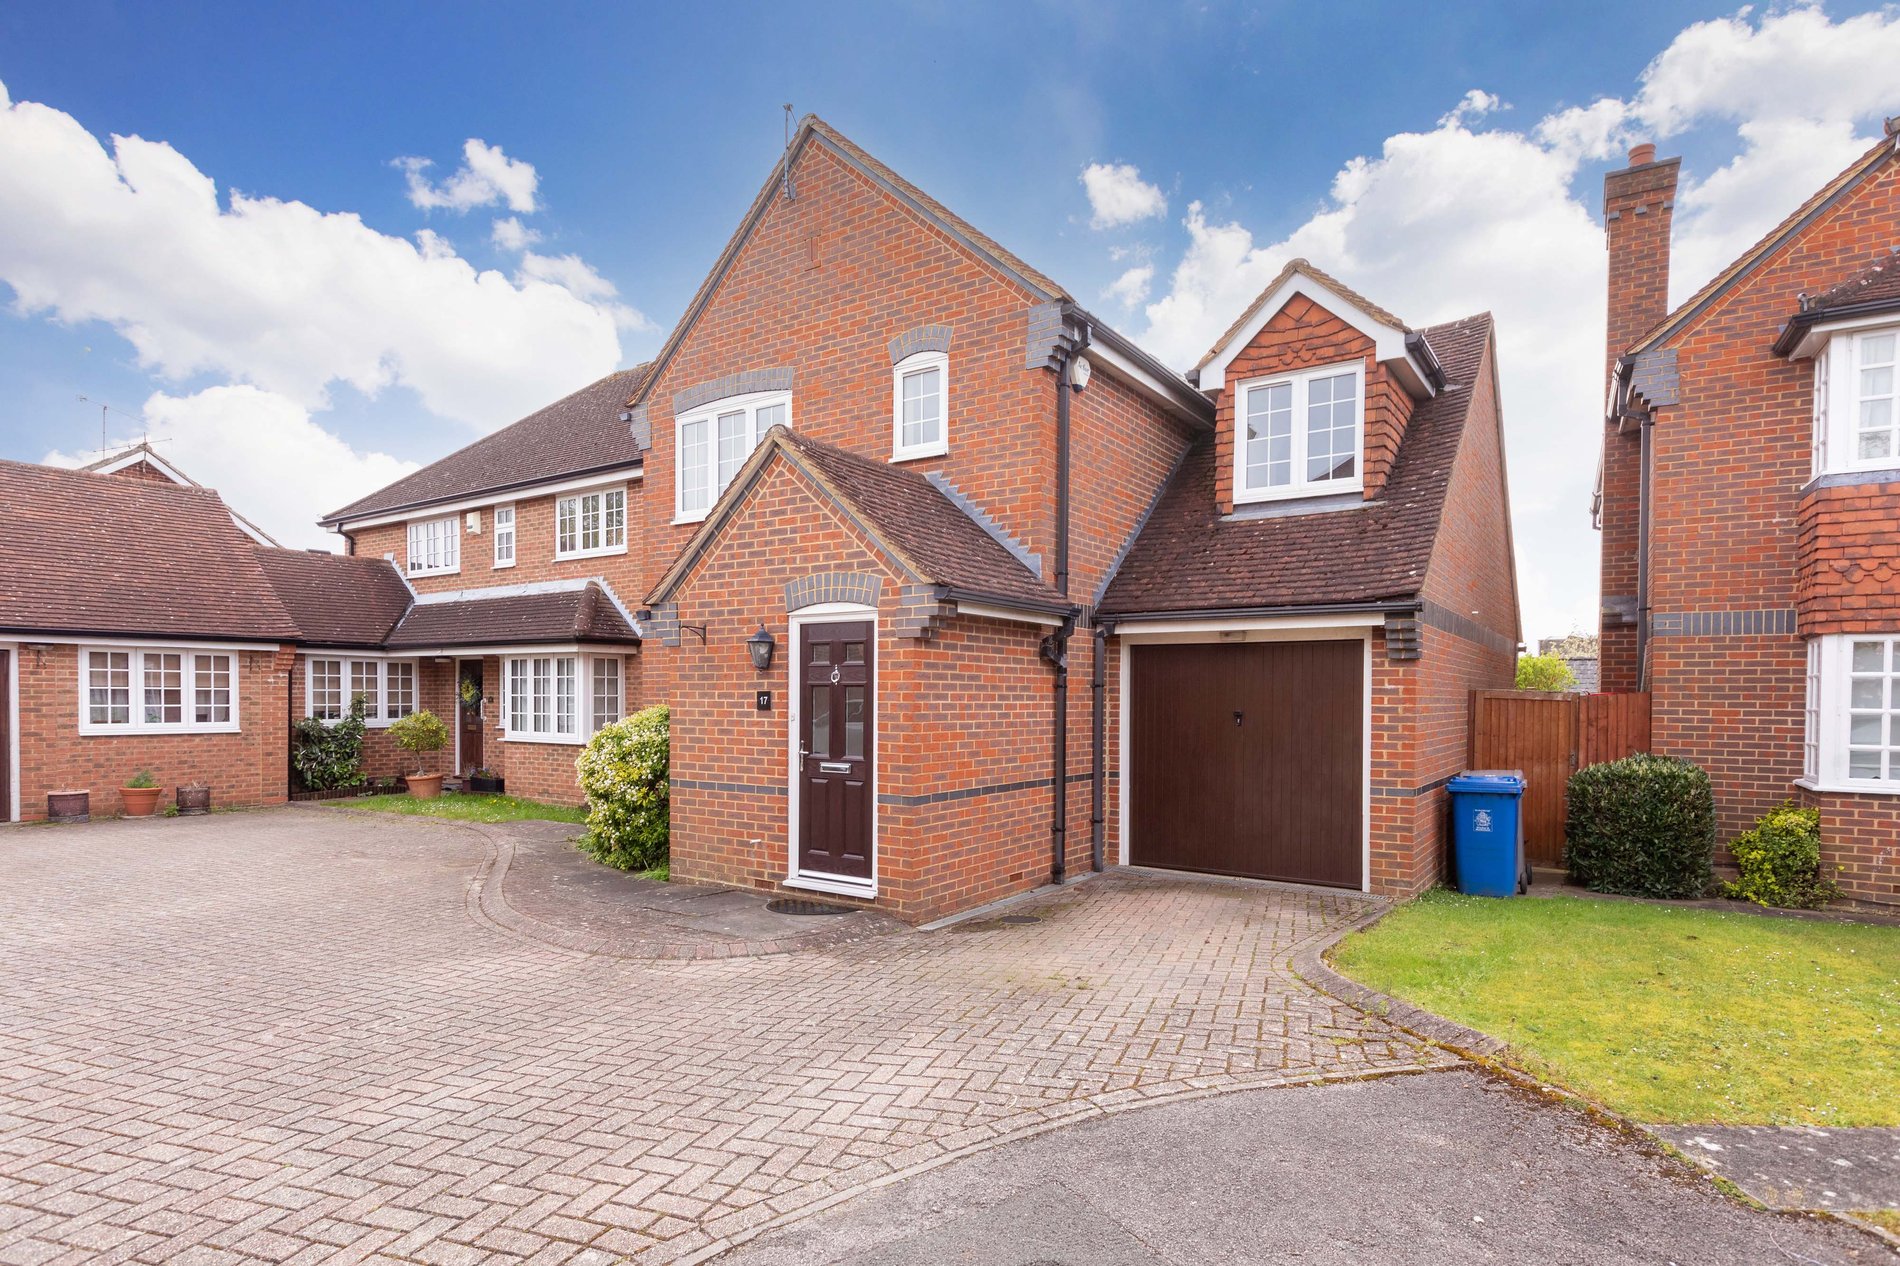 3 bed detached house for sale in Norden Meadows, Maidenhead  - Property Image 1